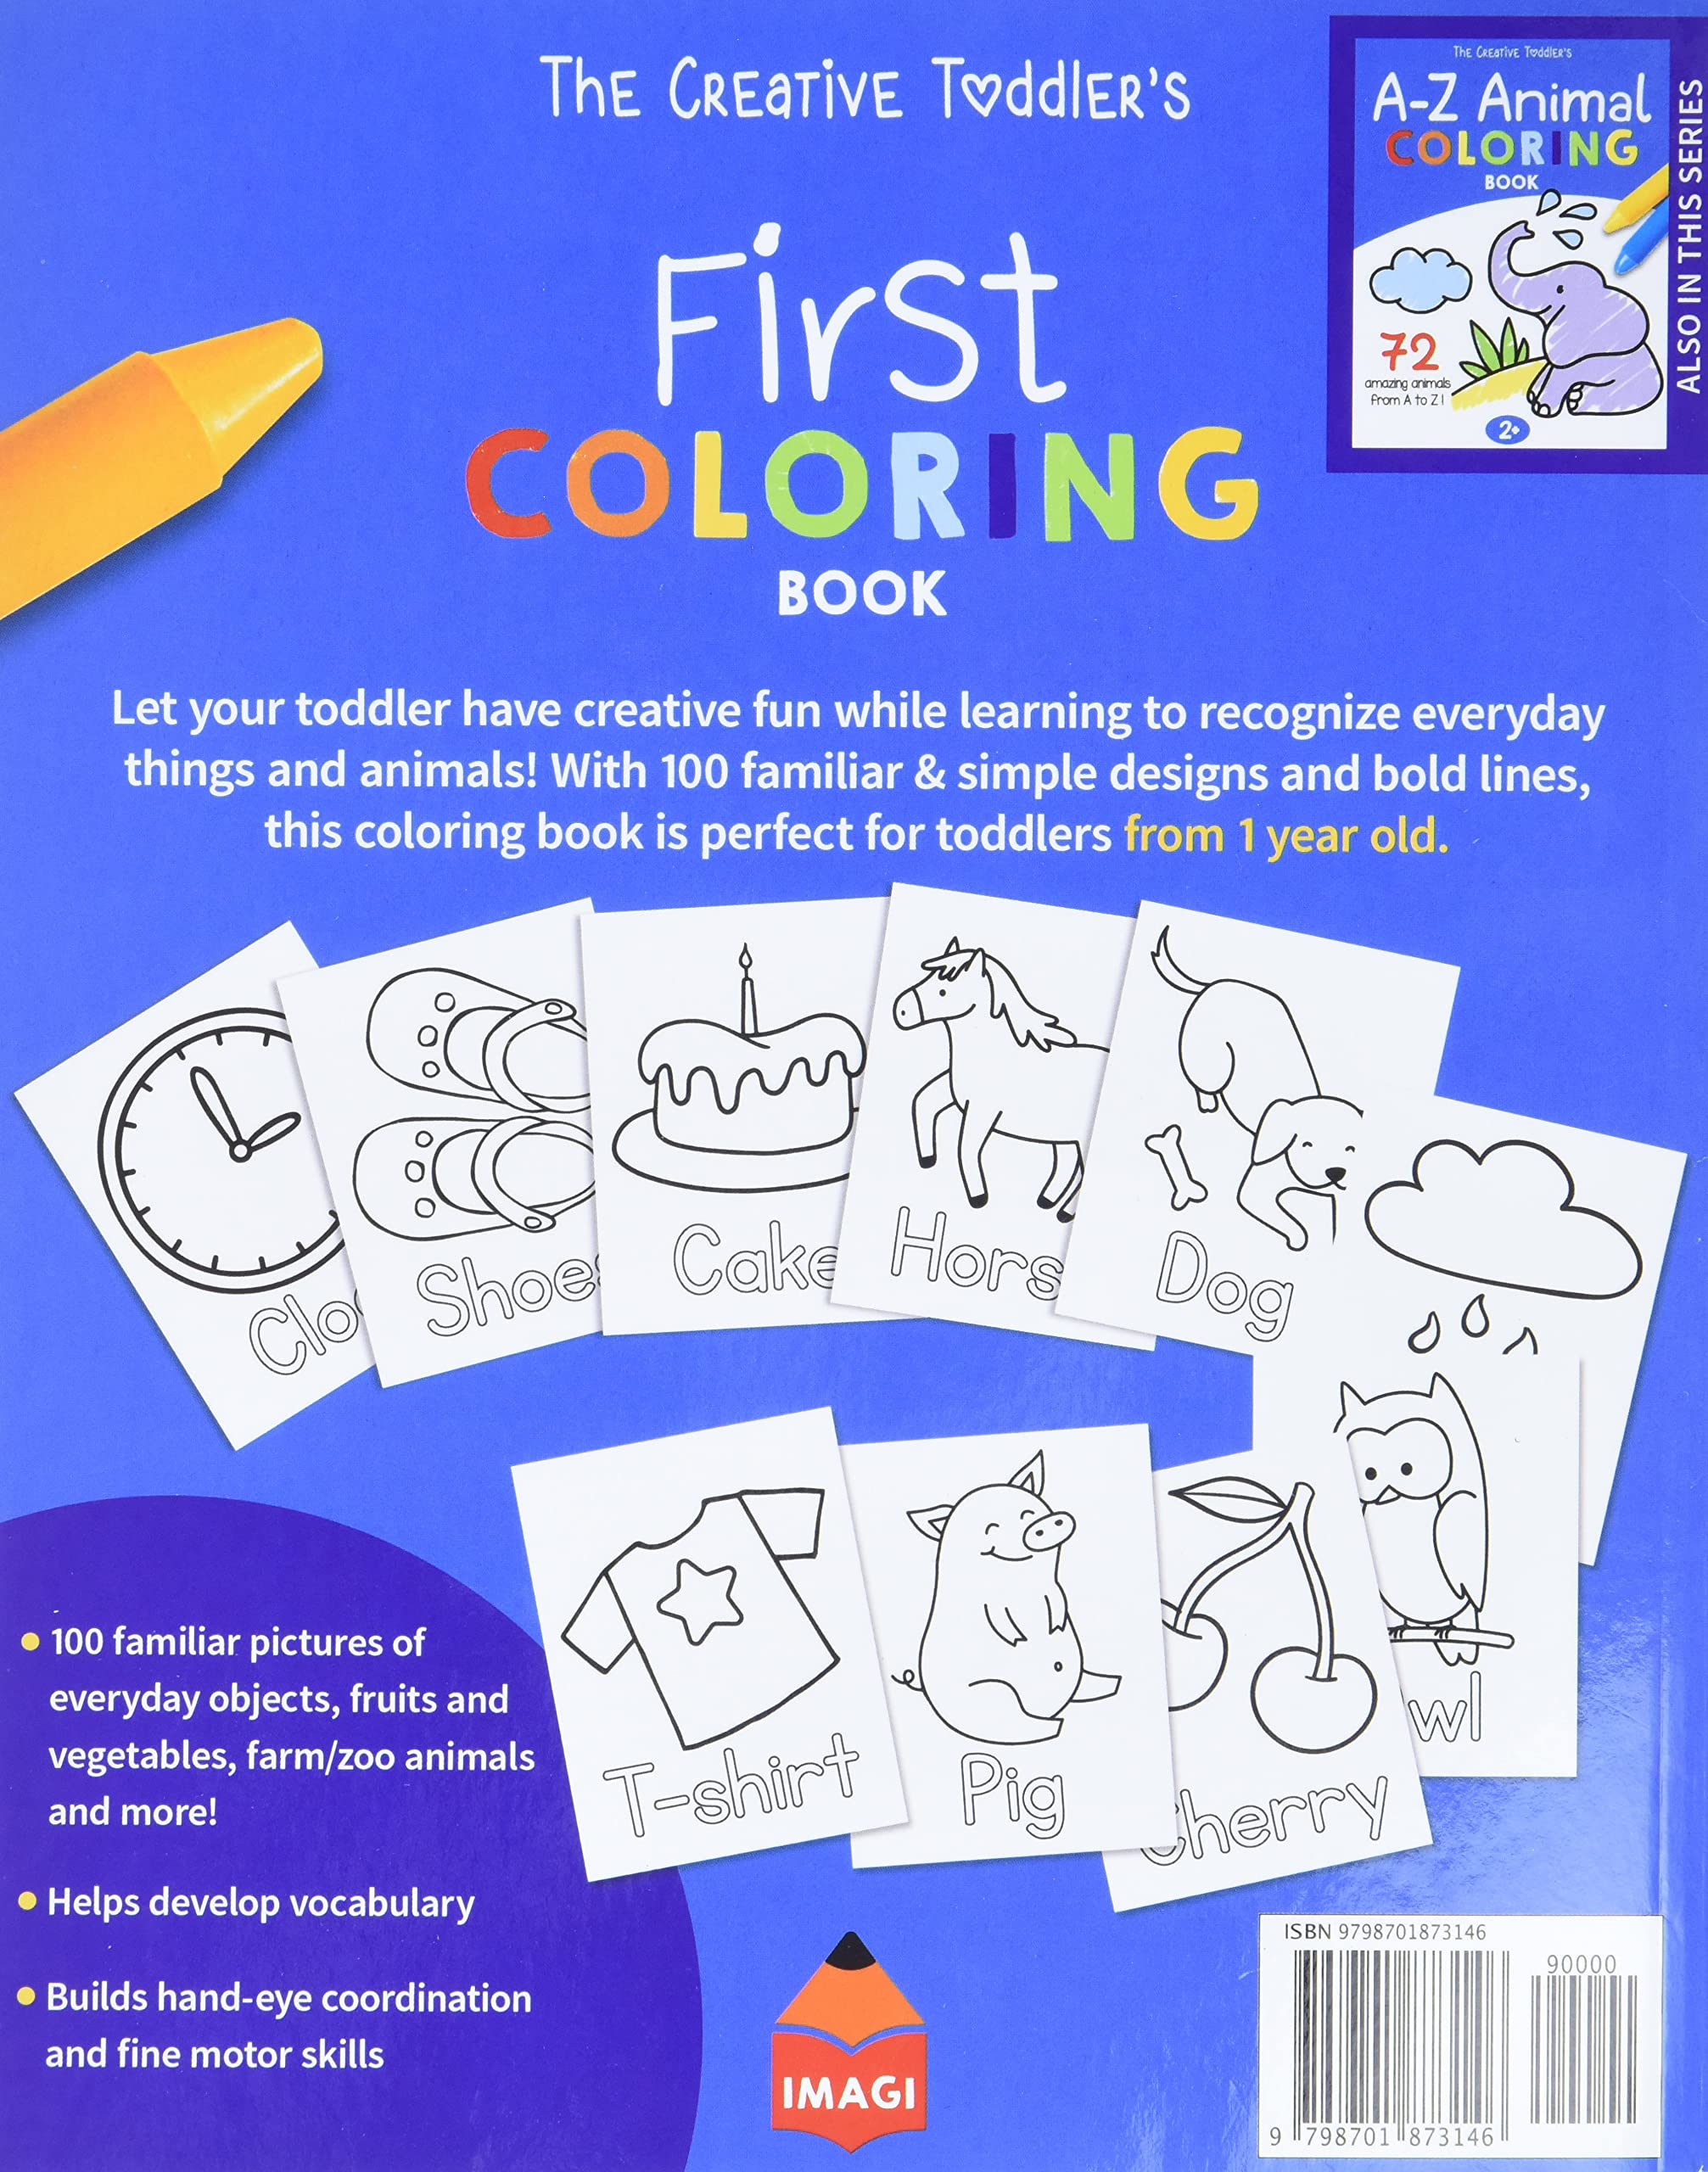 The Creative Toddler’s First Coloring Book back